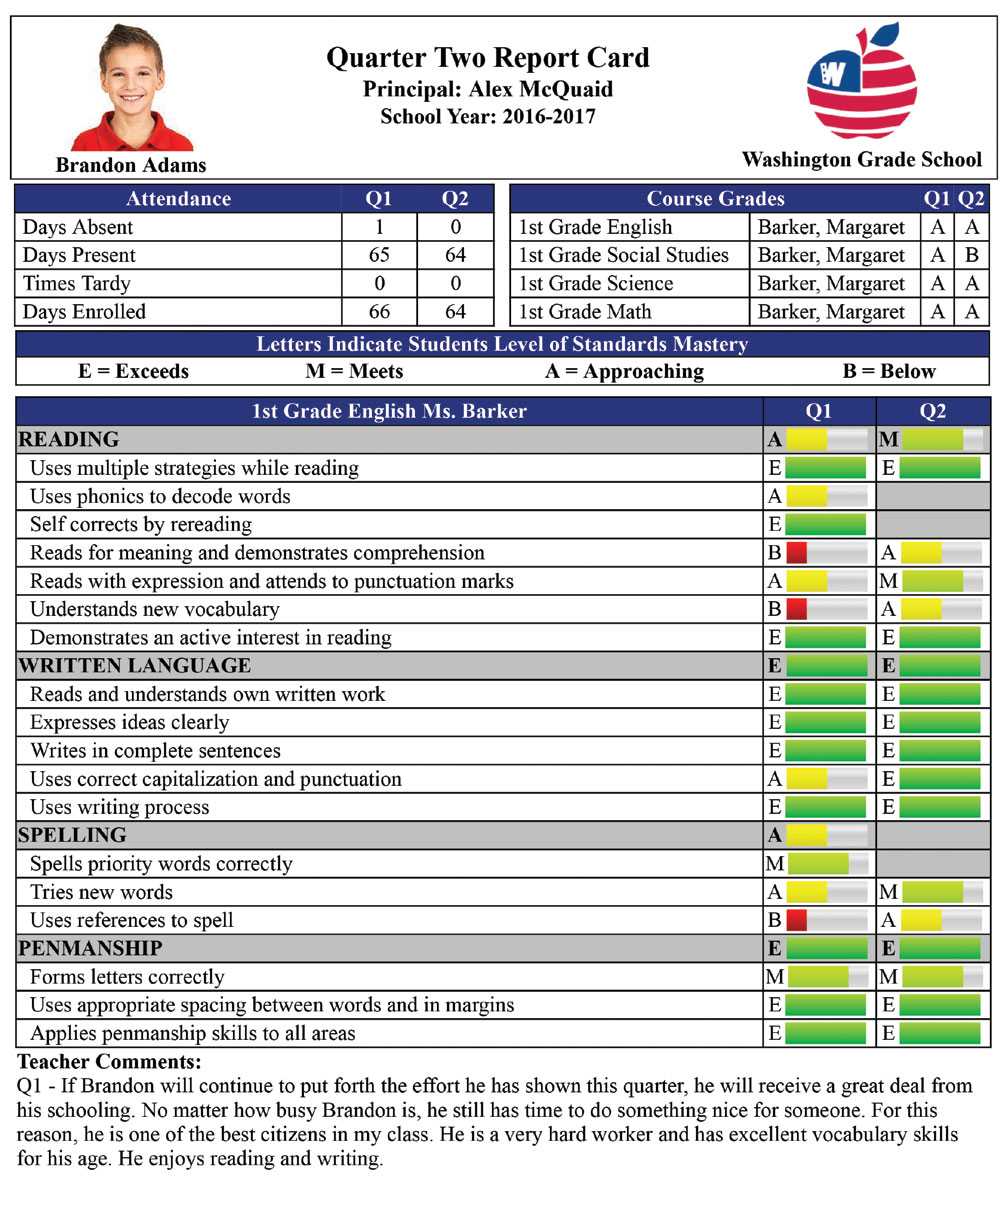 Report Card Creator Plugin For Powerschool Sis - From Mba Inside Powerschool Reports Templates